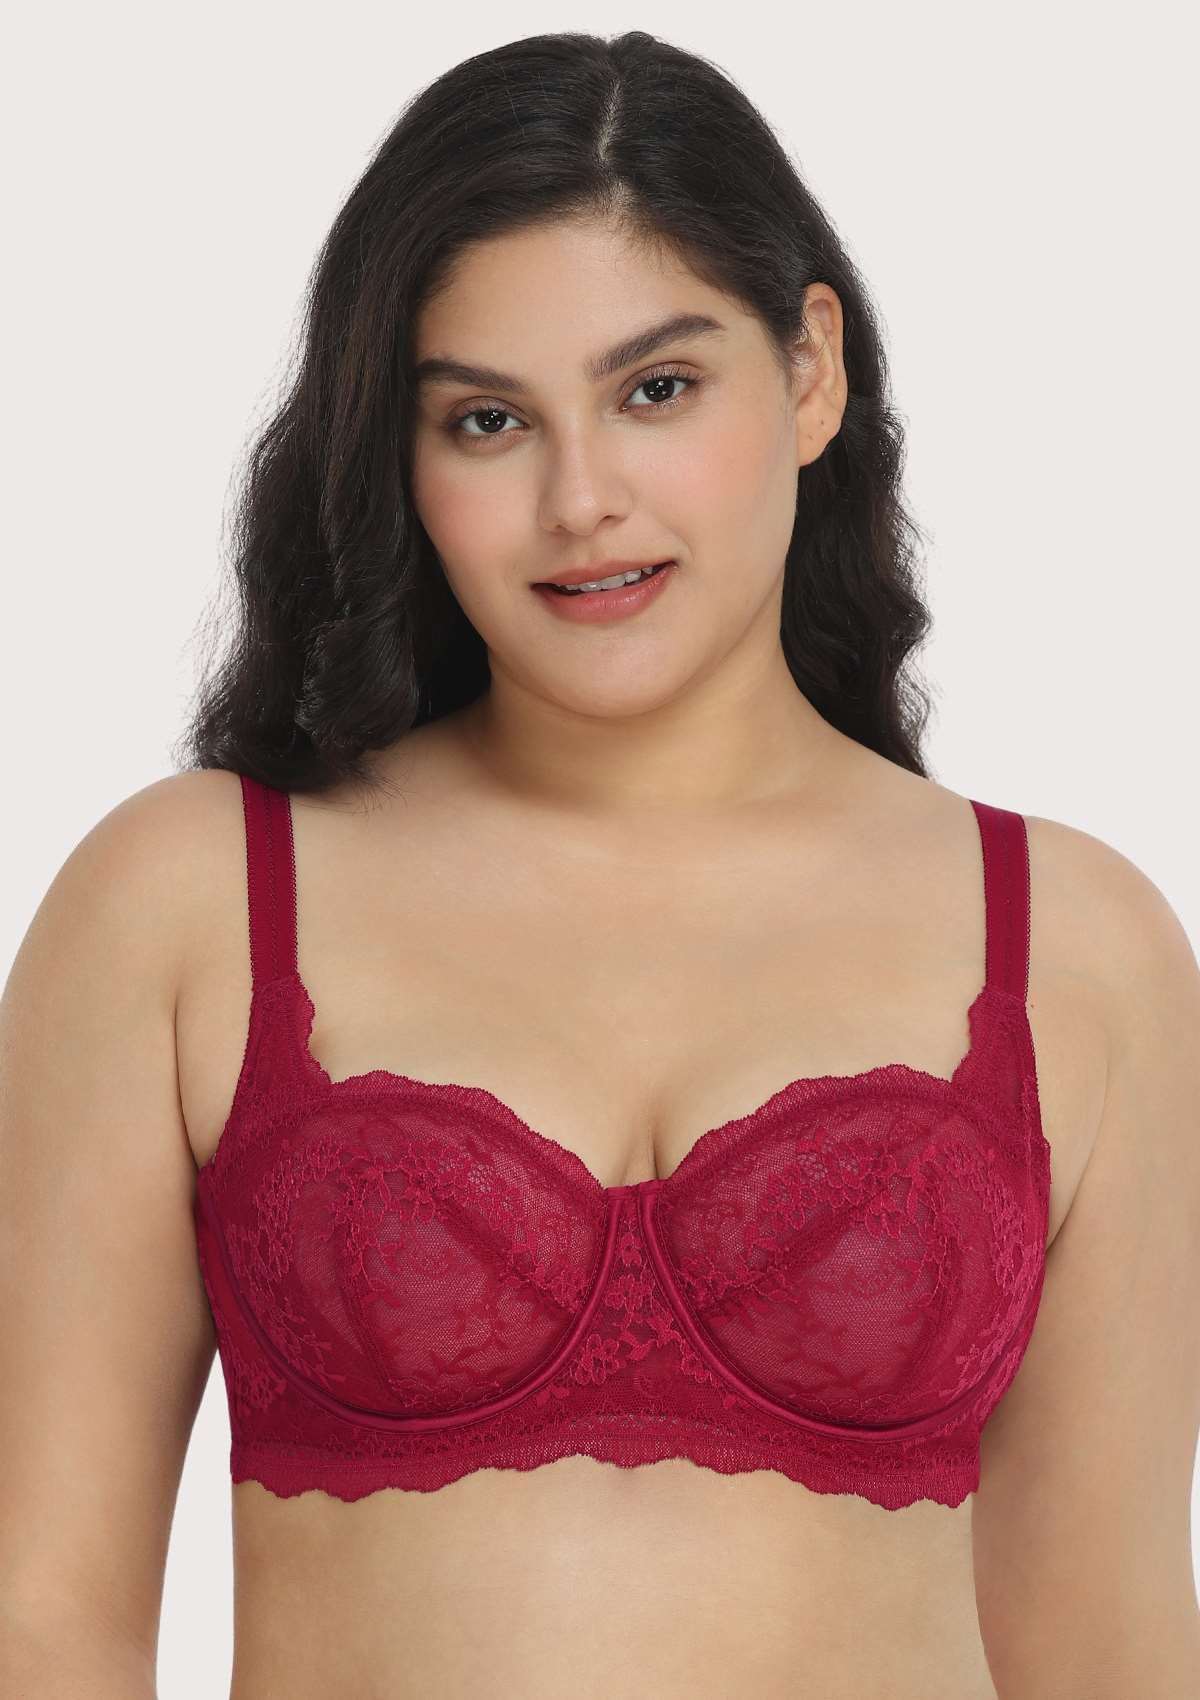 HSIA Floral Lace Unlined Bridal Balconette Bra Set - Supportive Classic - Burgundy / 40 / DD/E